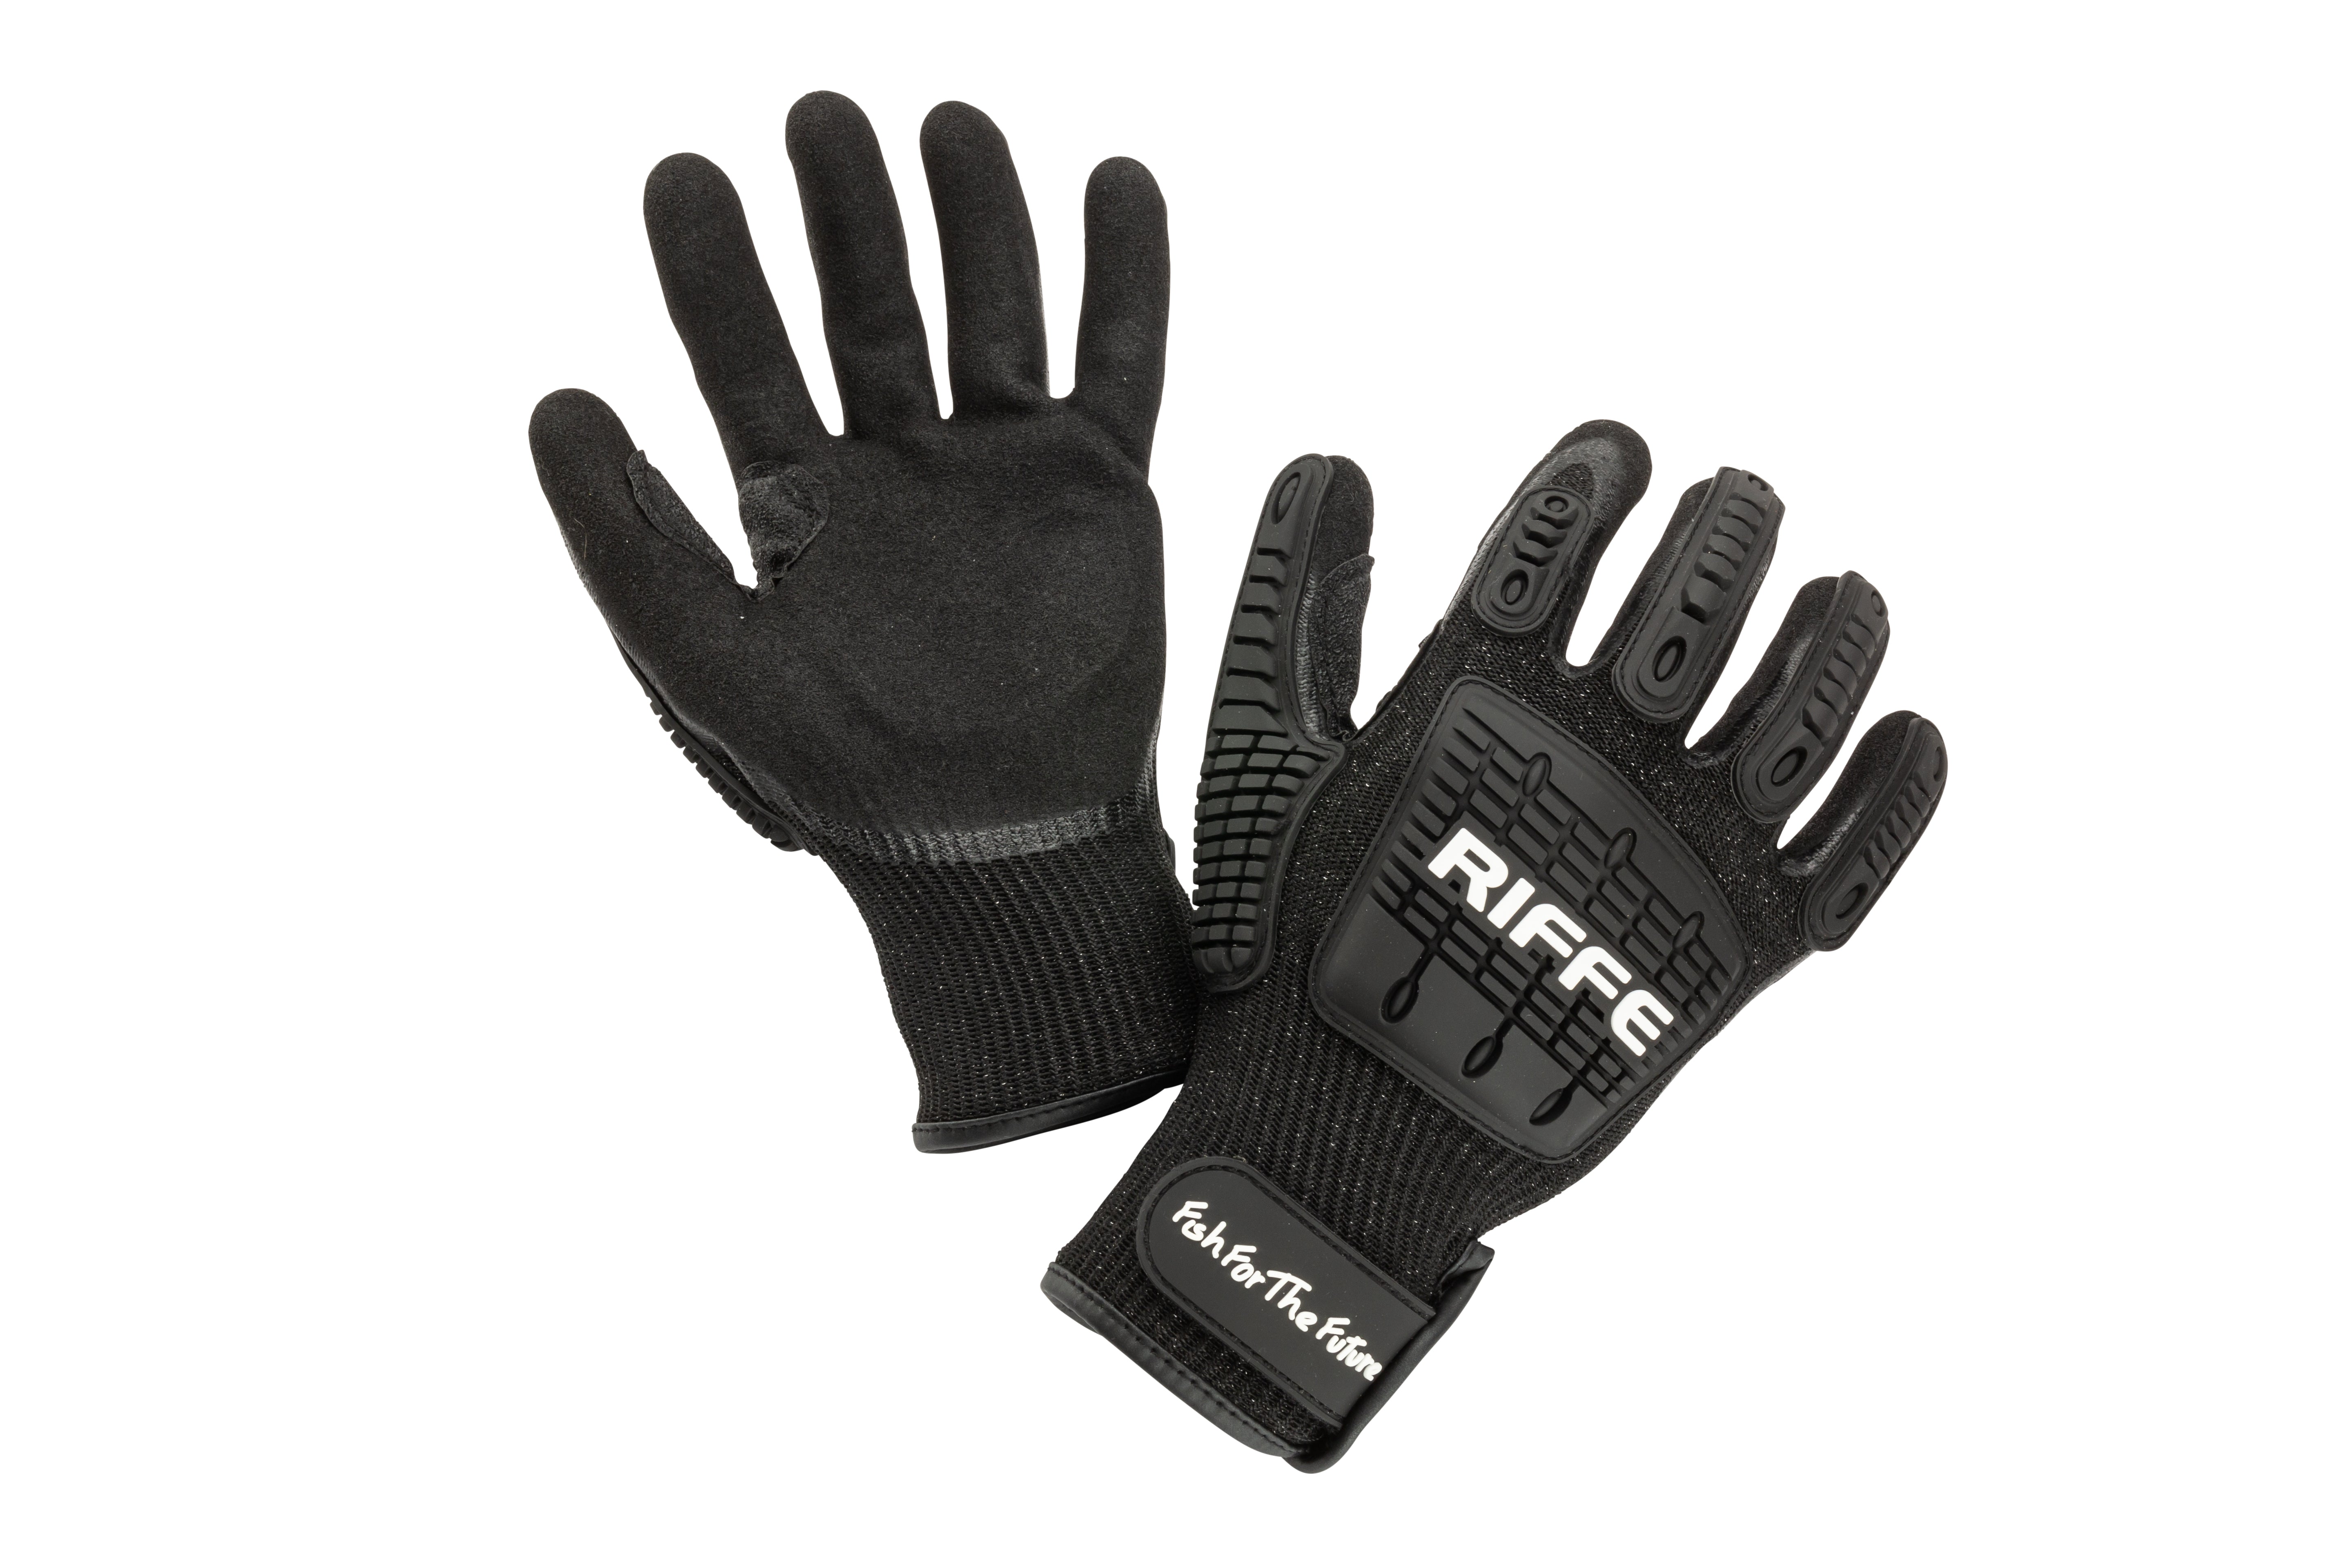 Riffe Holdfast/Cut-Resistant Impact Gloves With Velcro Strap